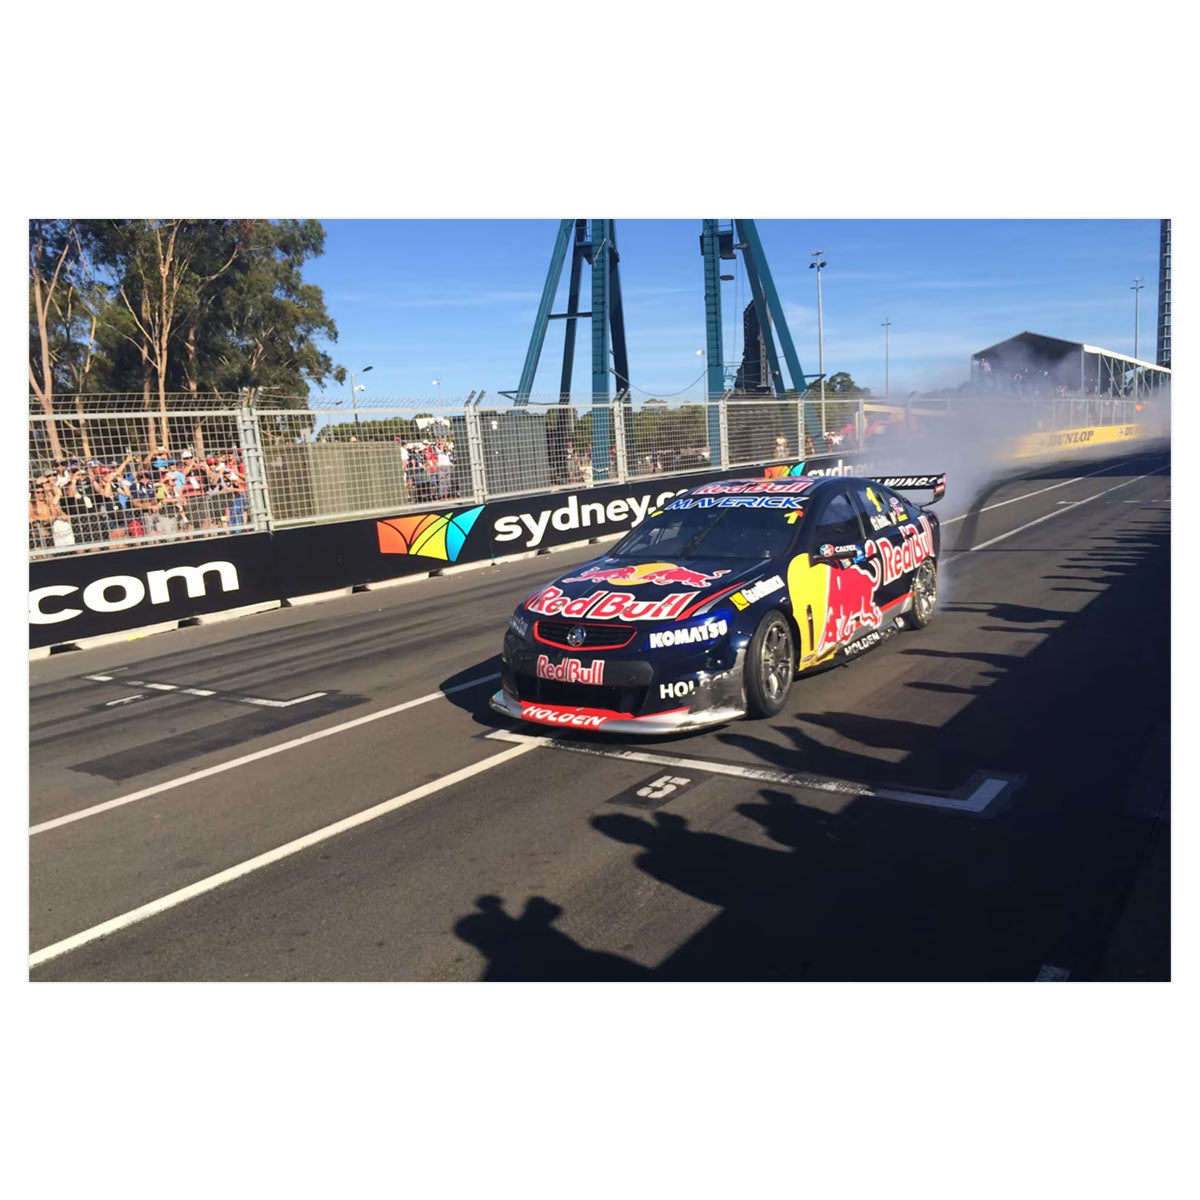 Holden VF Commodore - Red Bull Holden Racing #1 - Whincup - 2013 Championship Winner - Sydney Nrma Motoring & Services 500